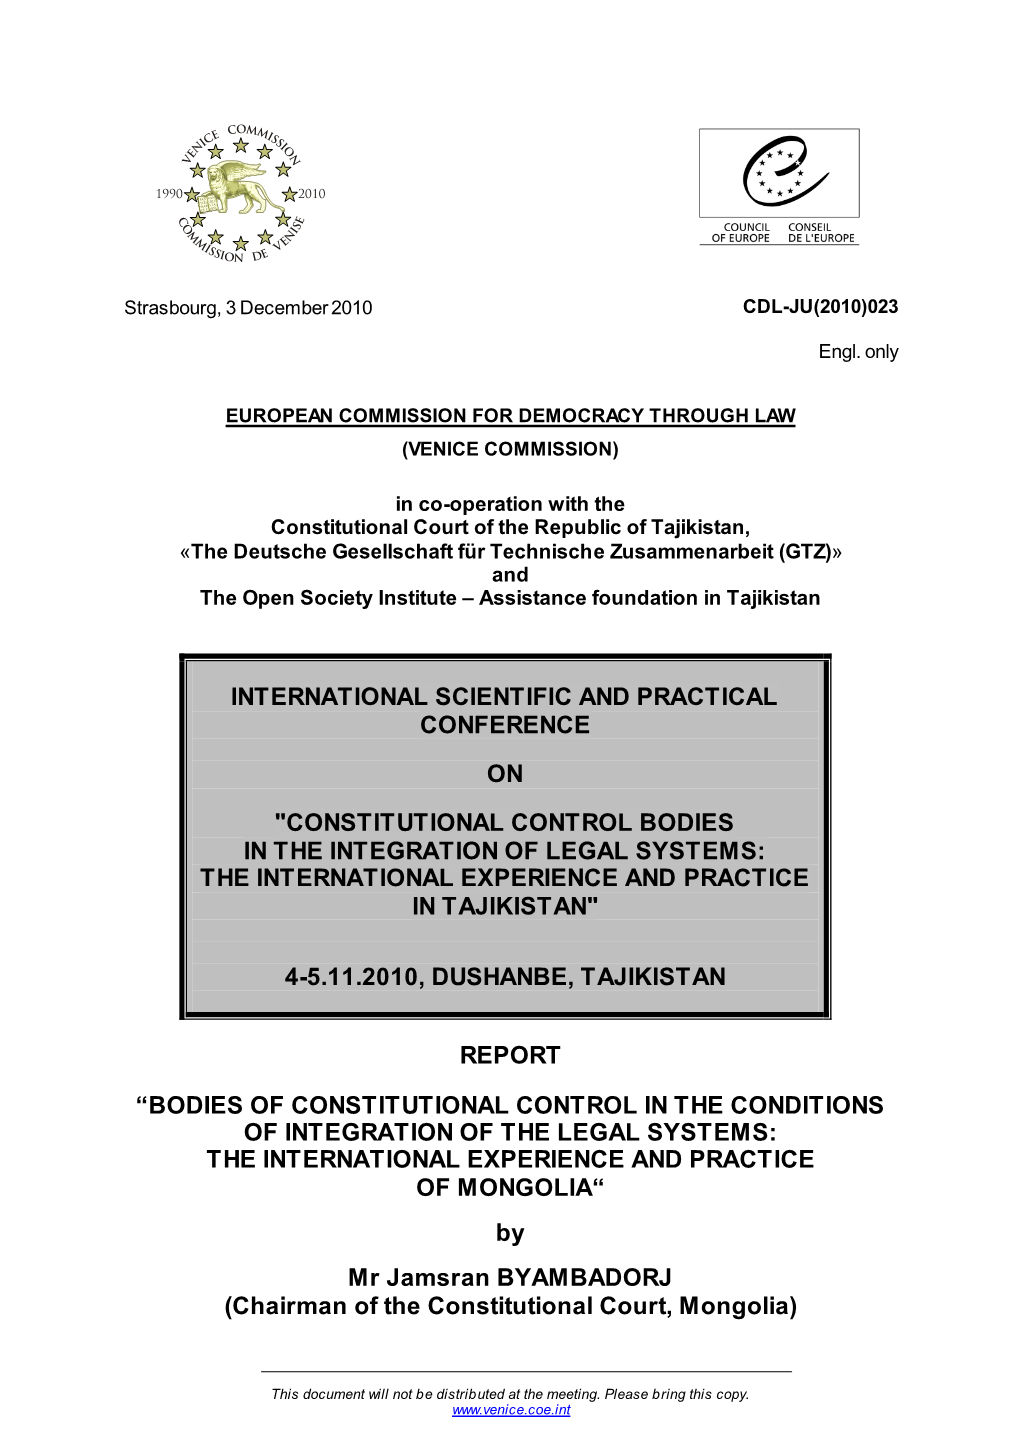 Constitutional Control Bodies in the Integration of Legal Systems: the International Experience and Practice in Tajikistan"